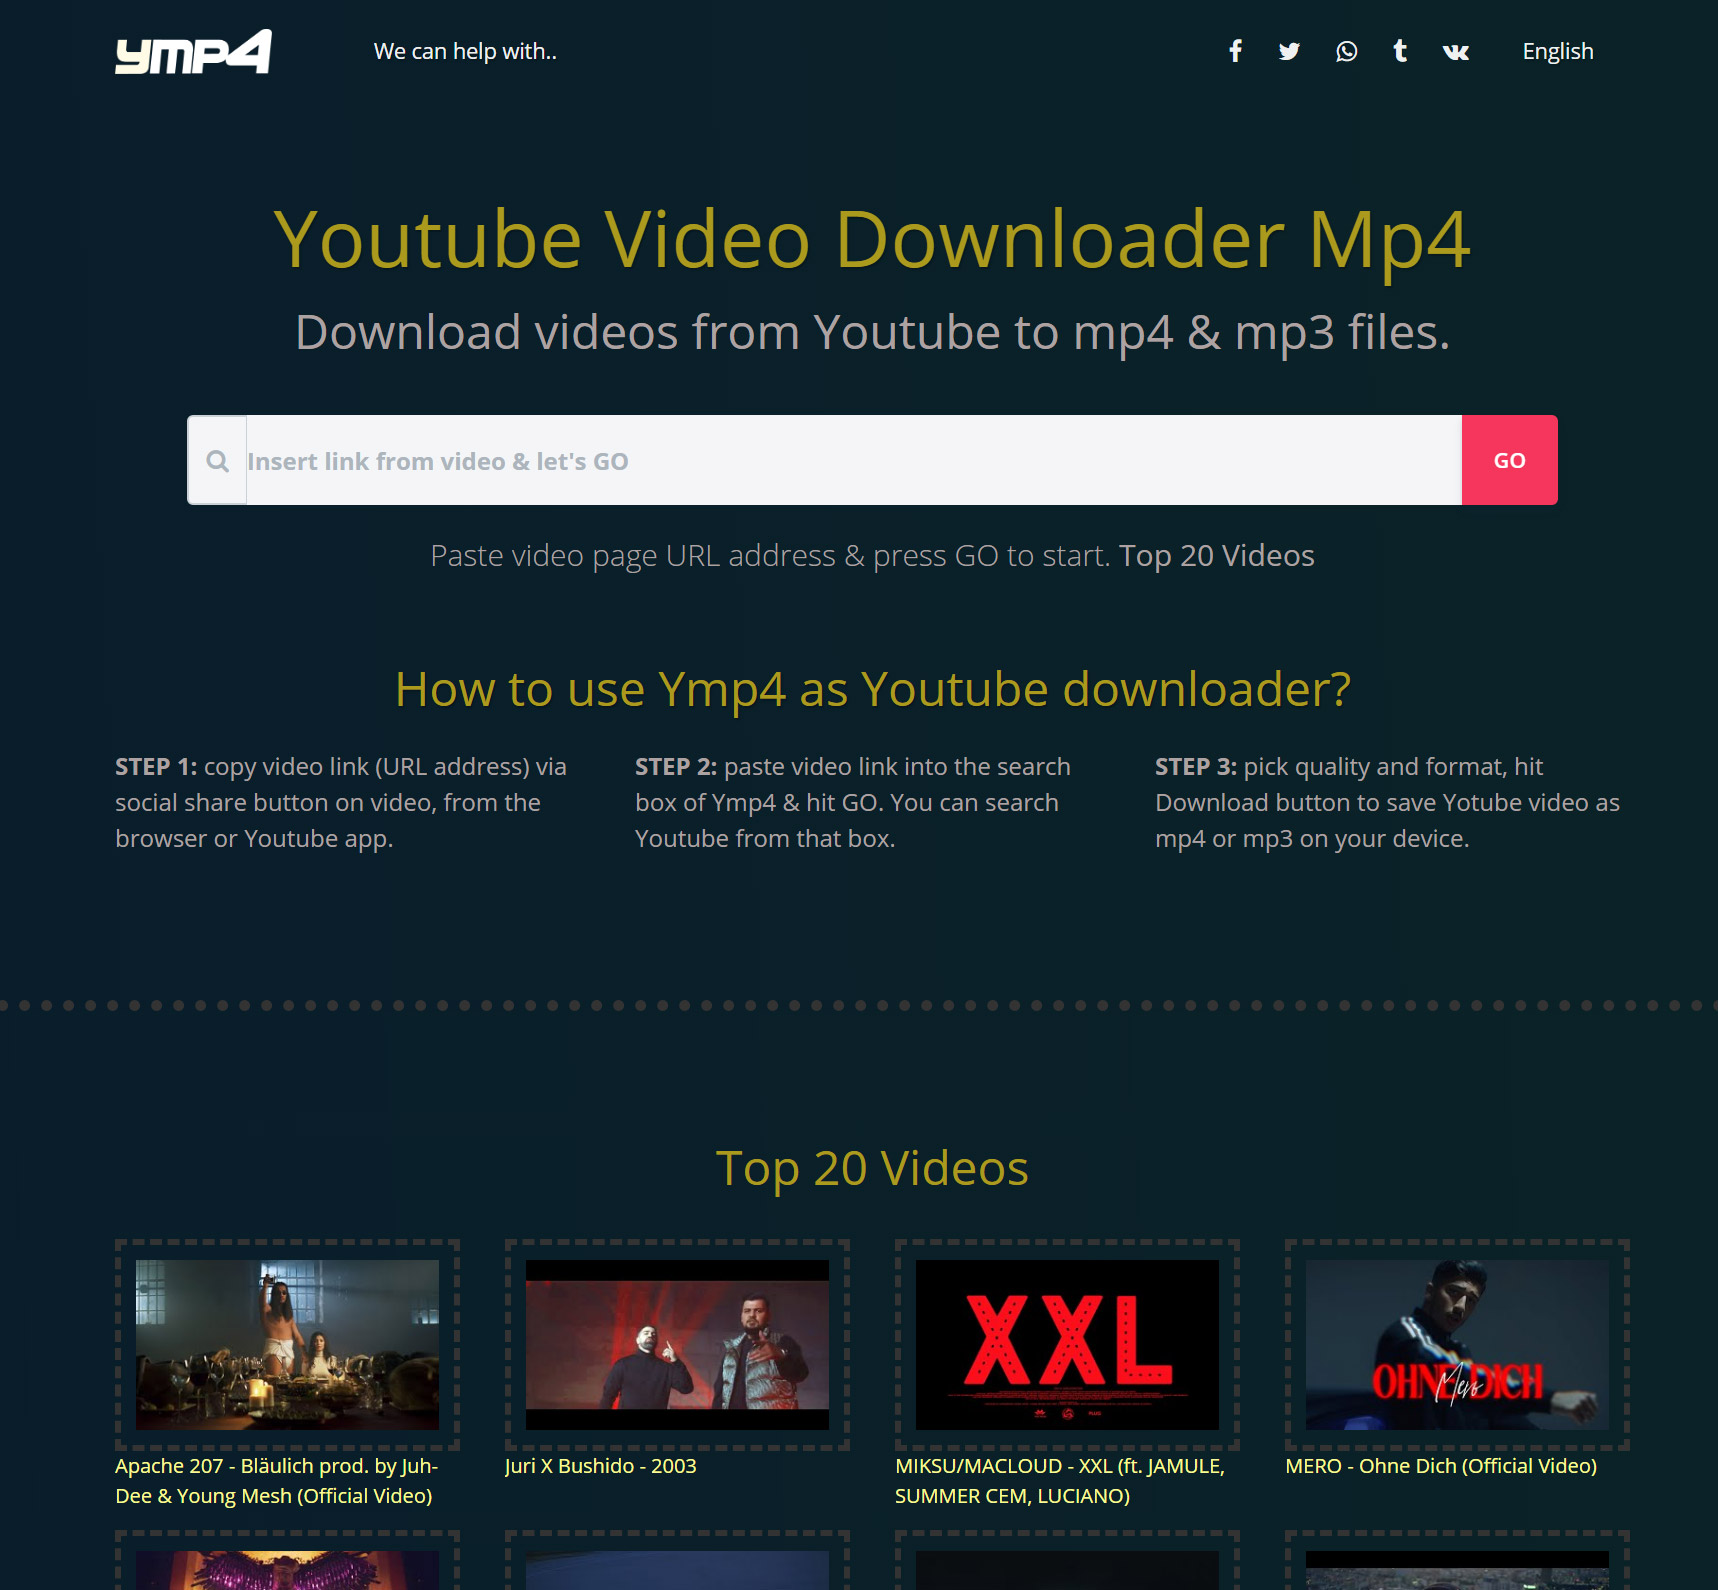 youtube video download mp4 hd